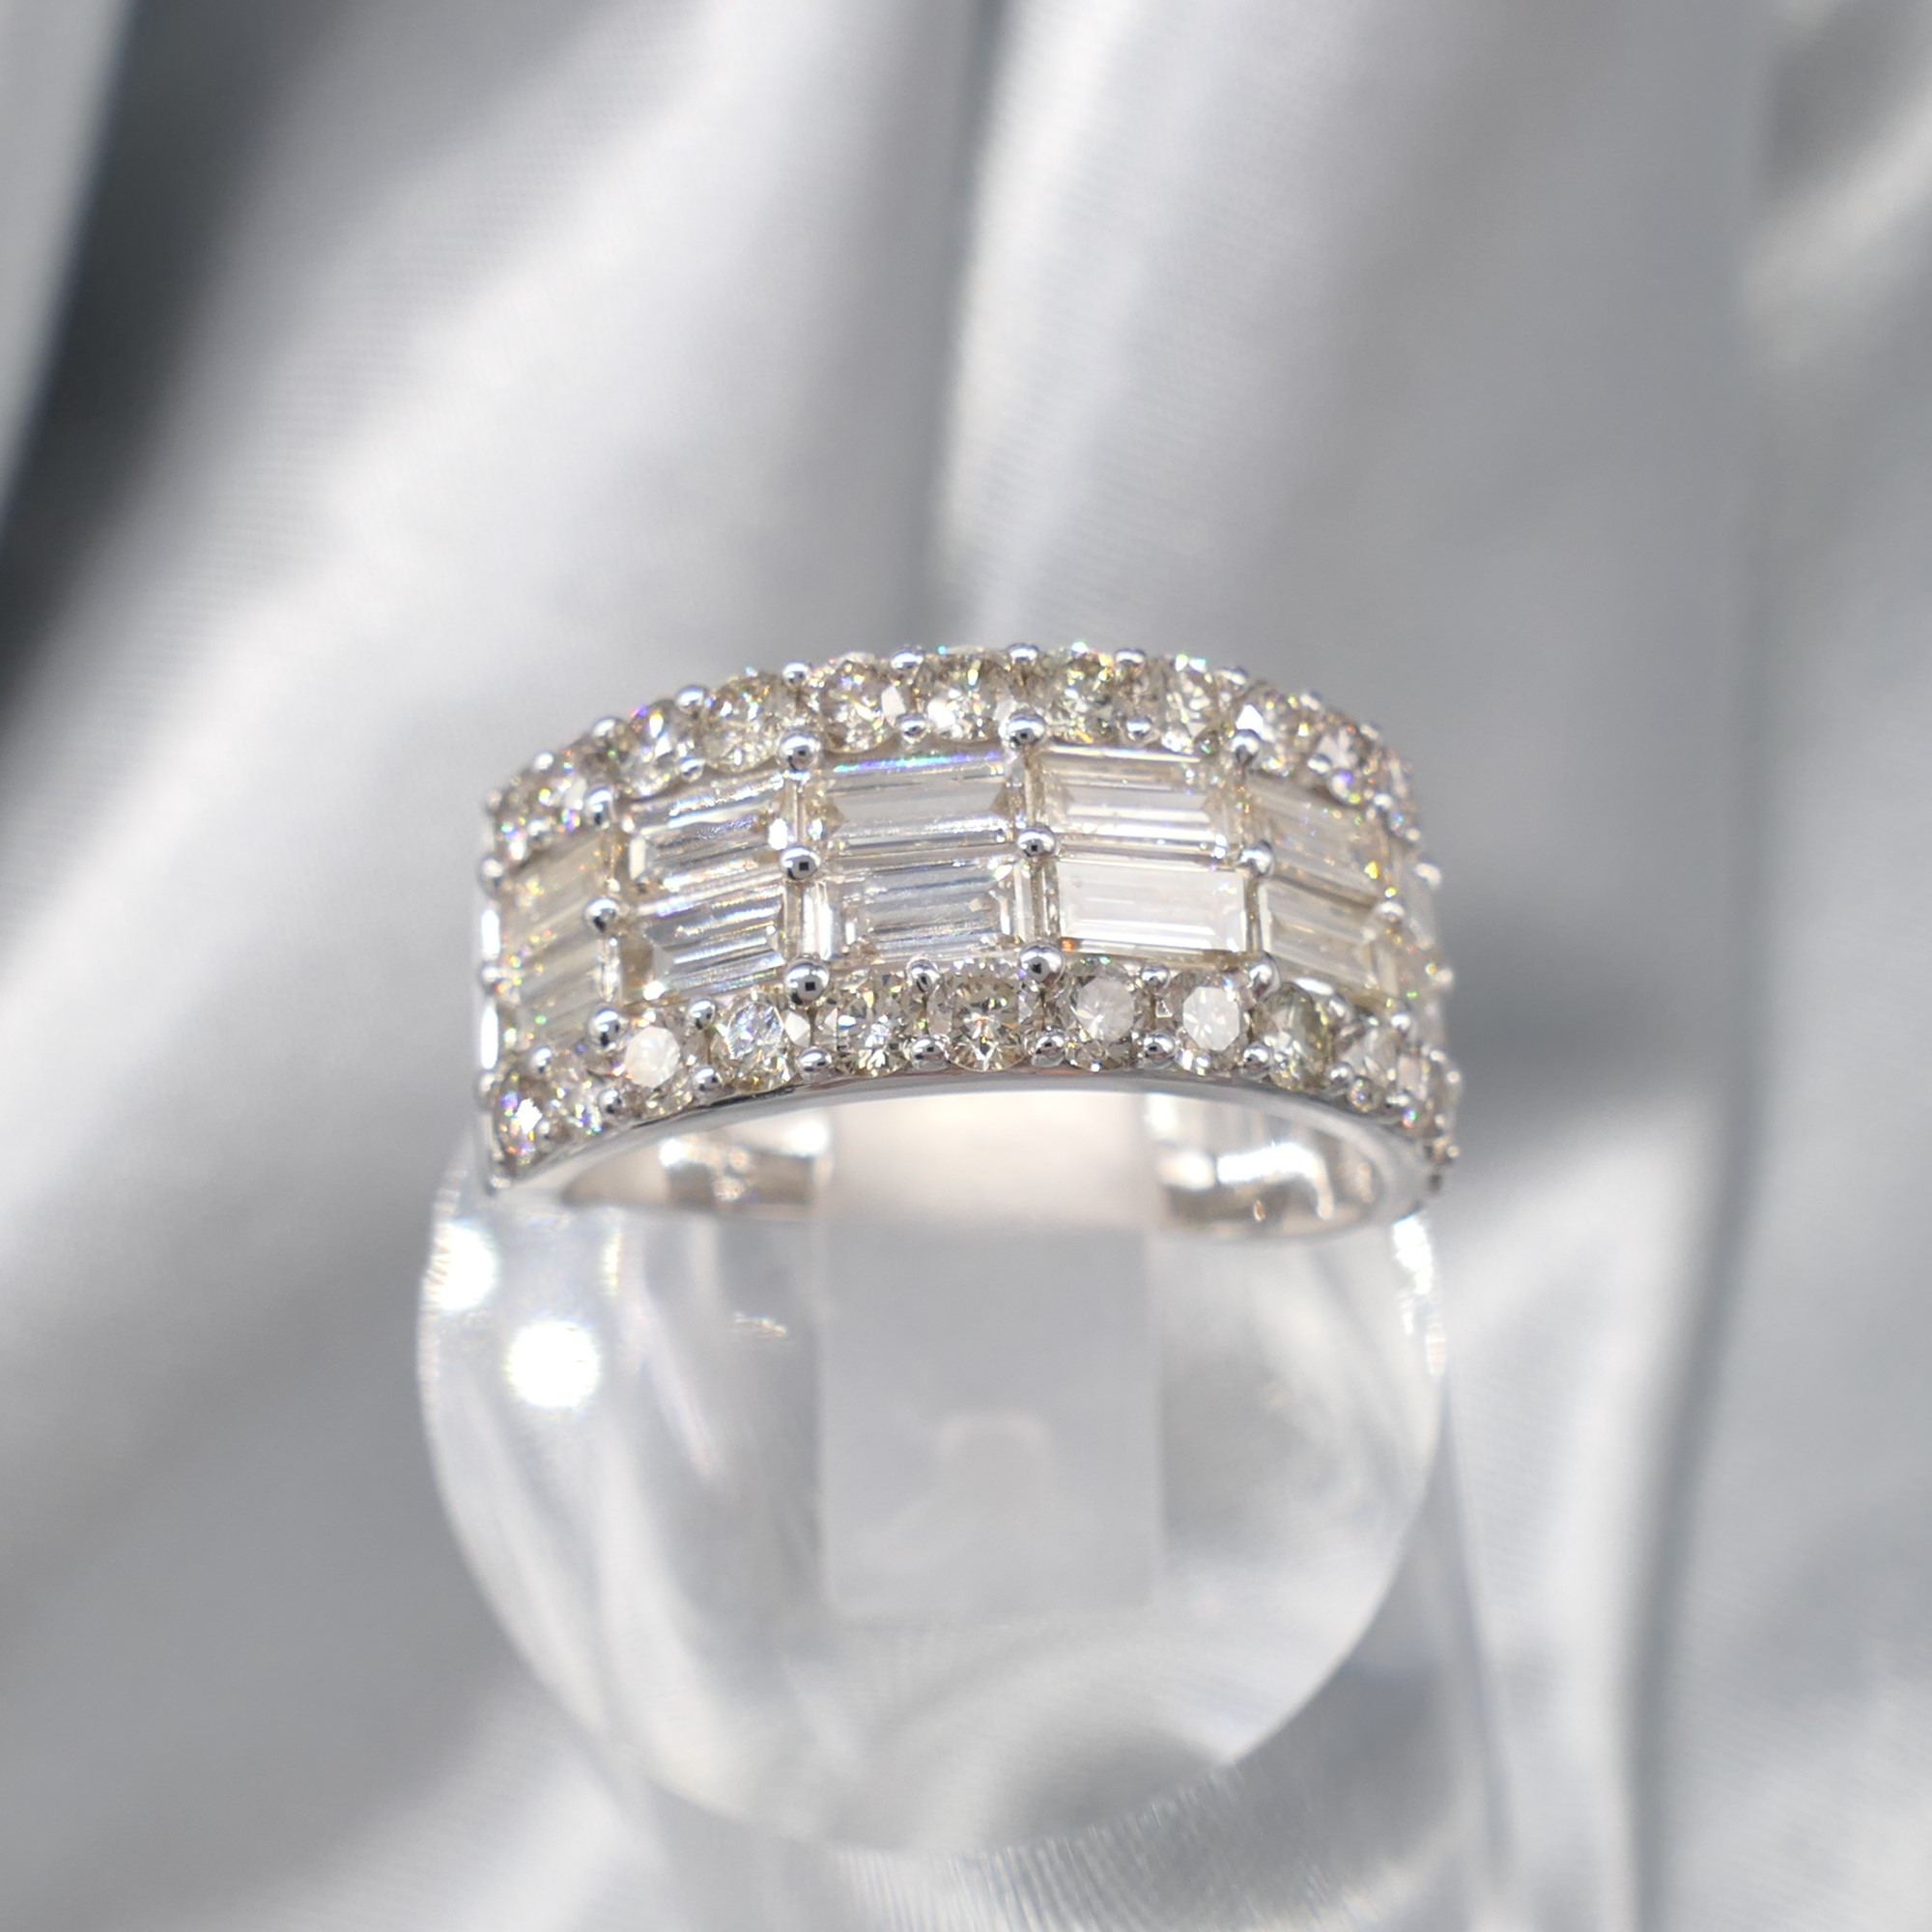 2.72 Carat Round Brilliant-Cut and Baguette-Cut Diamond Cocktail Ring - Image 5 of 6